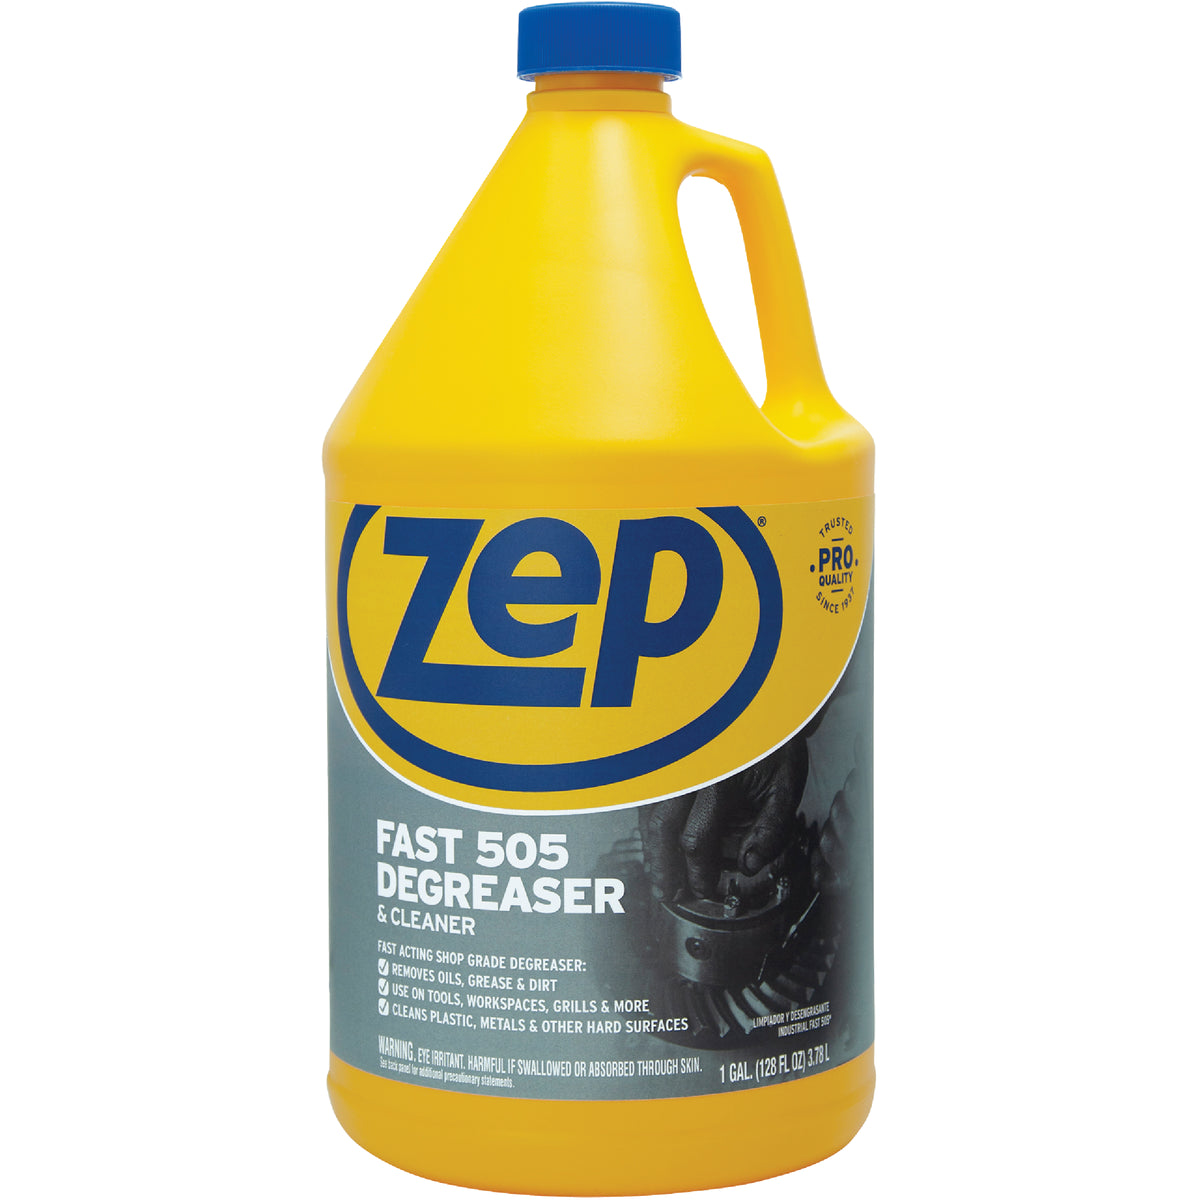 Fast 505 Industrial Cleaner & Degreaser - 3.78 Litres – Zep Canada